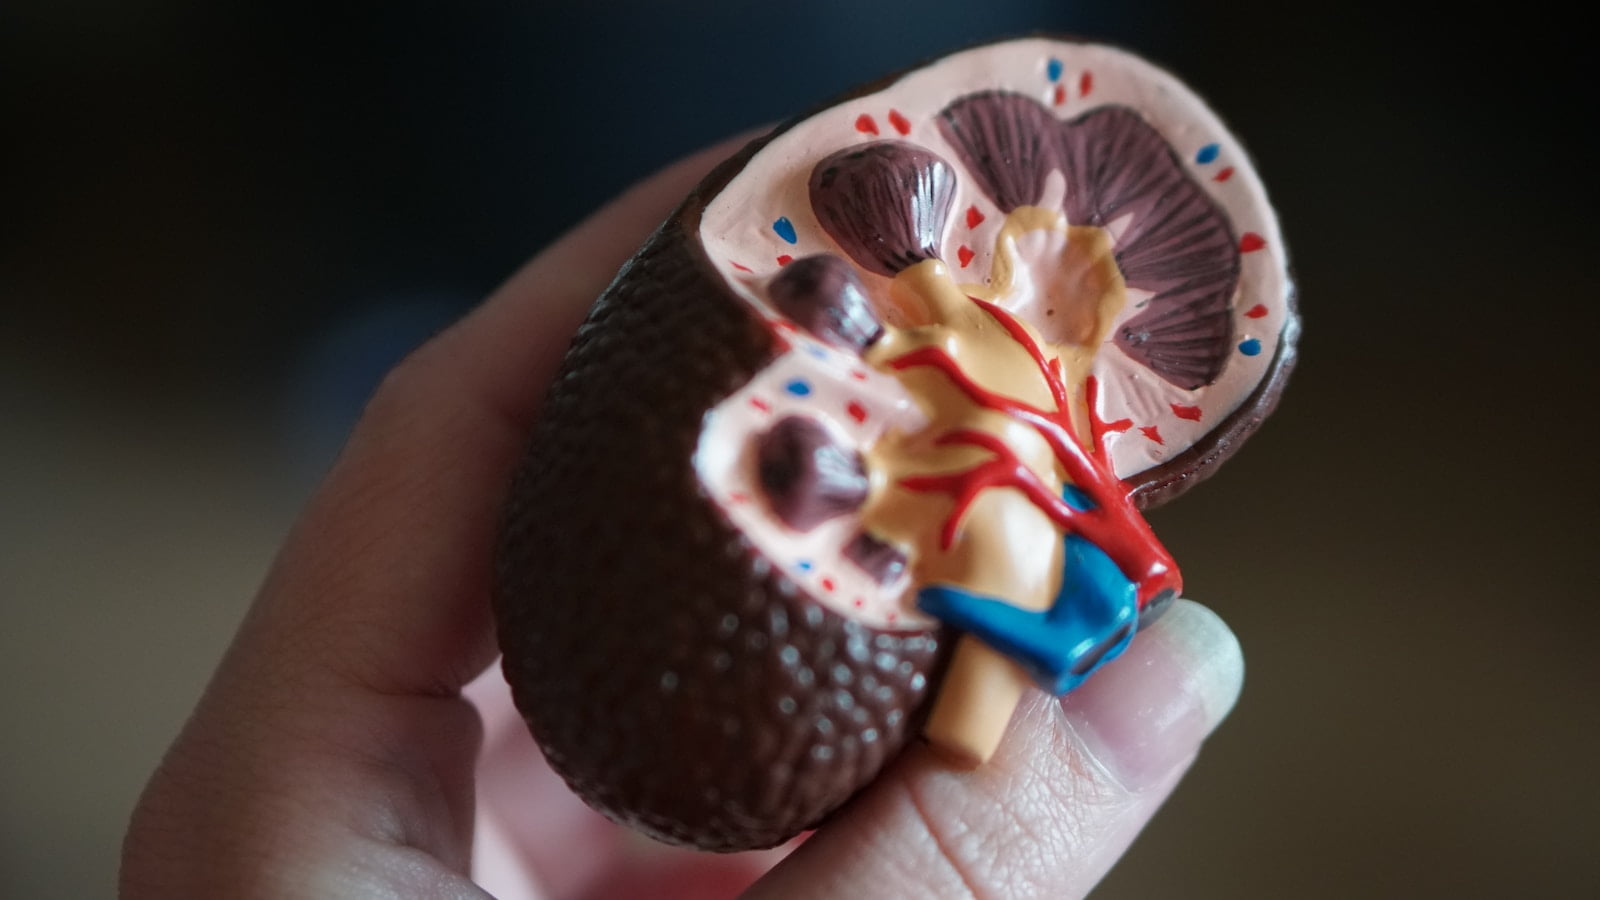 A person holding a model of a kidney, providing diet advice for senior health.